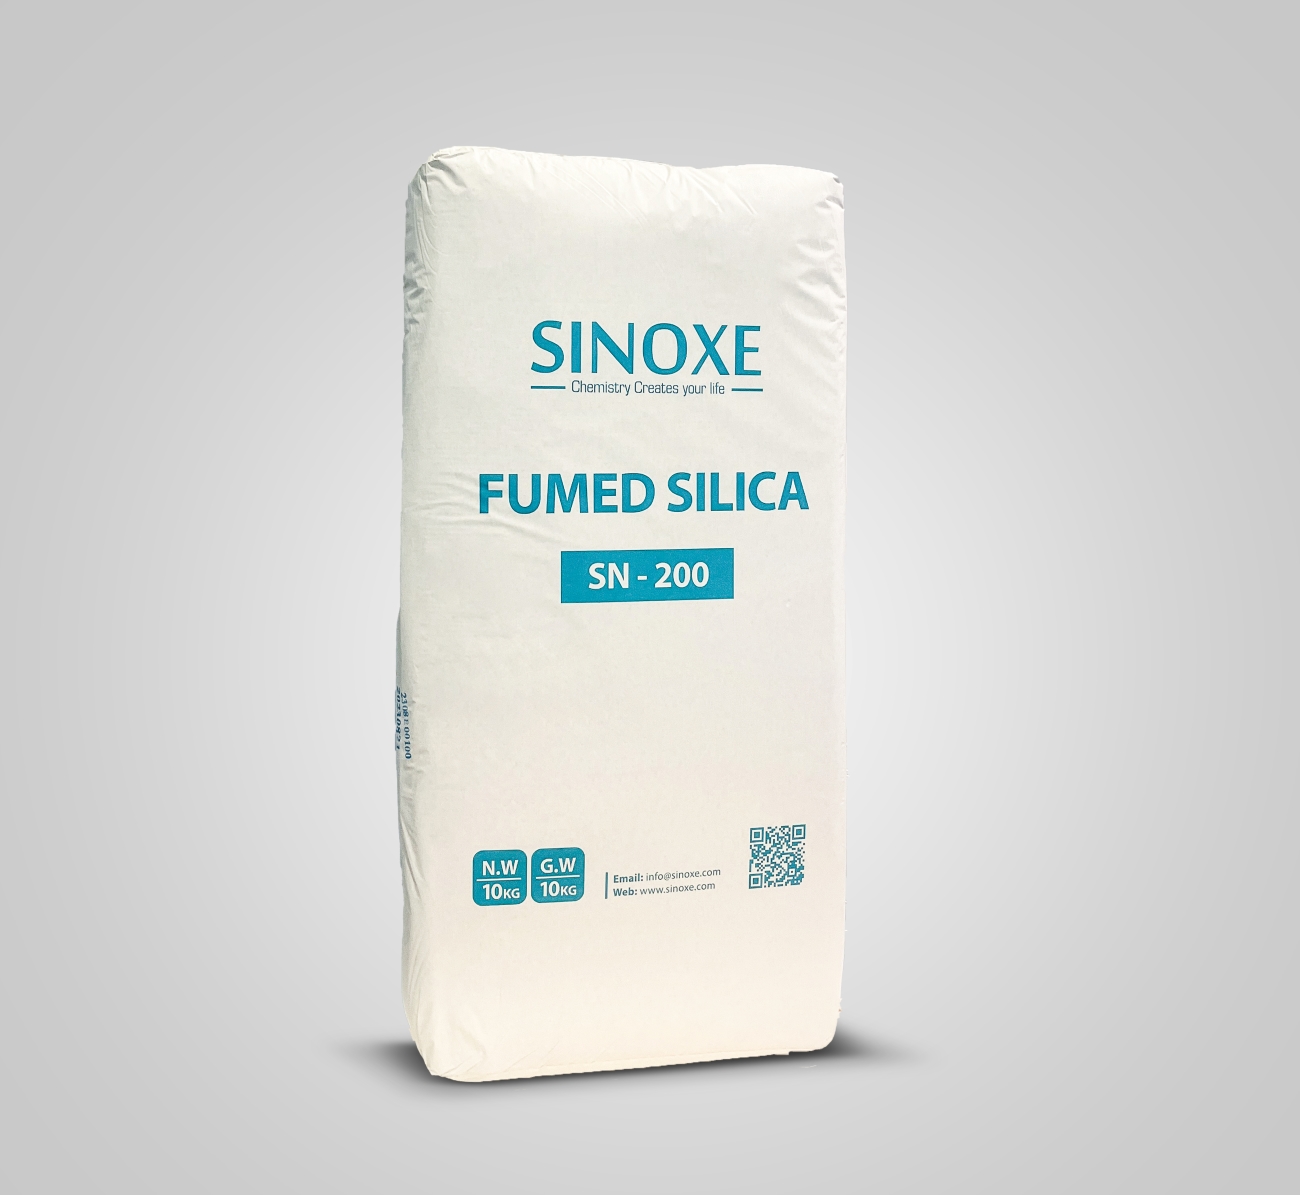 Fumed Silica [Properties, Applications, and Production] - Sinoxe